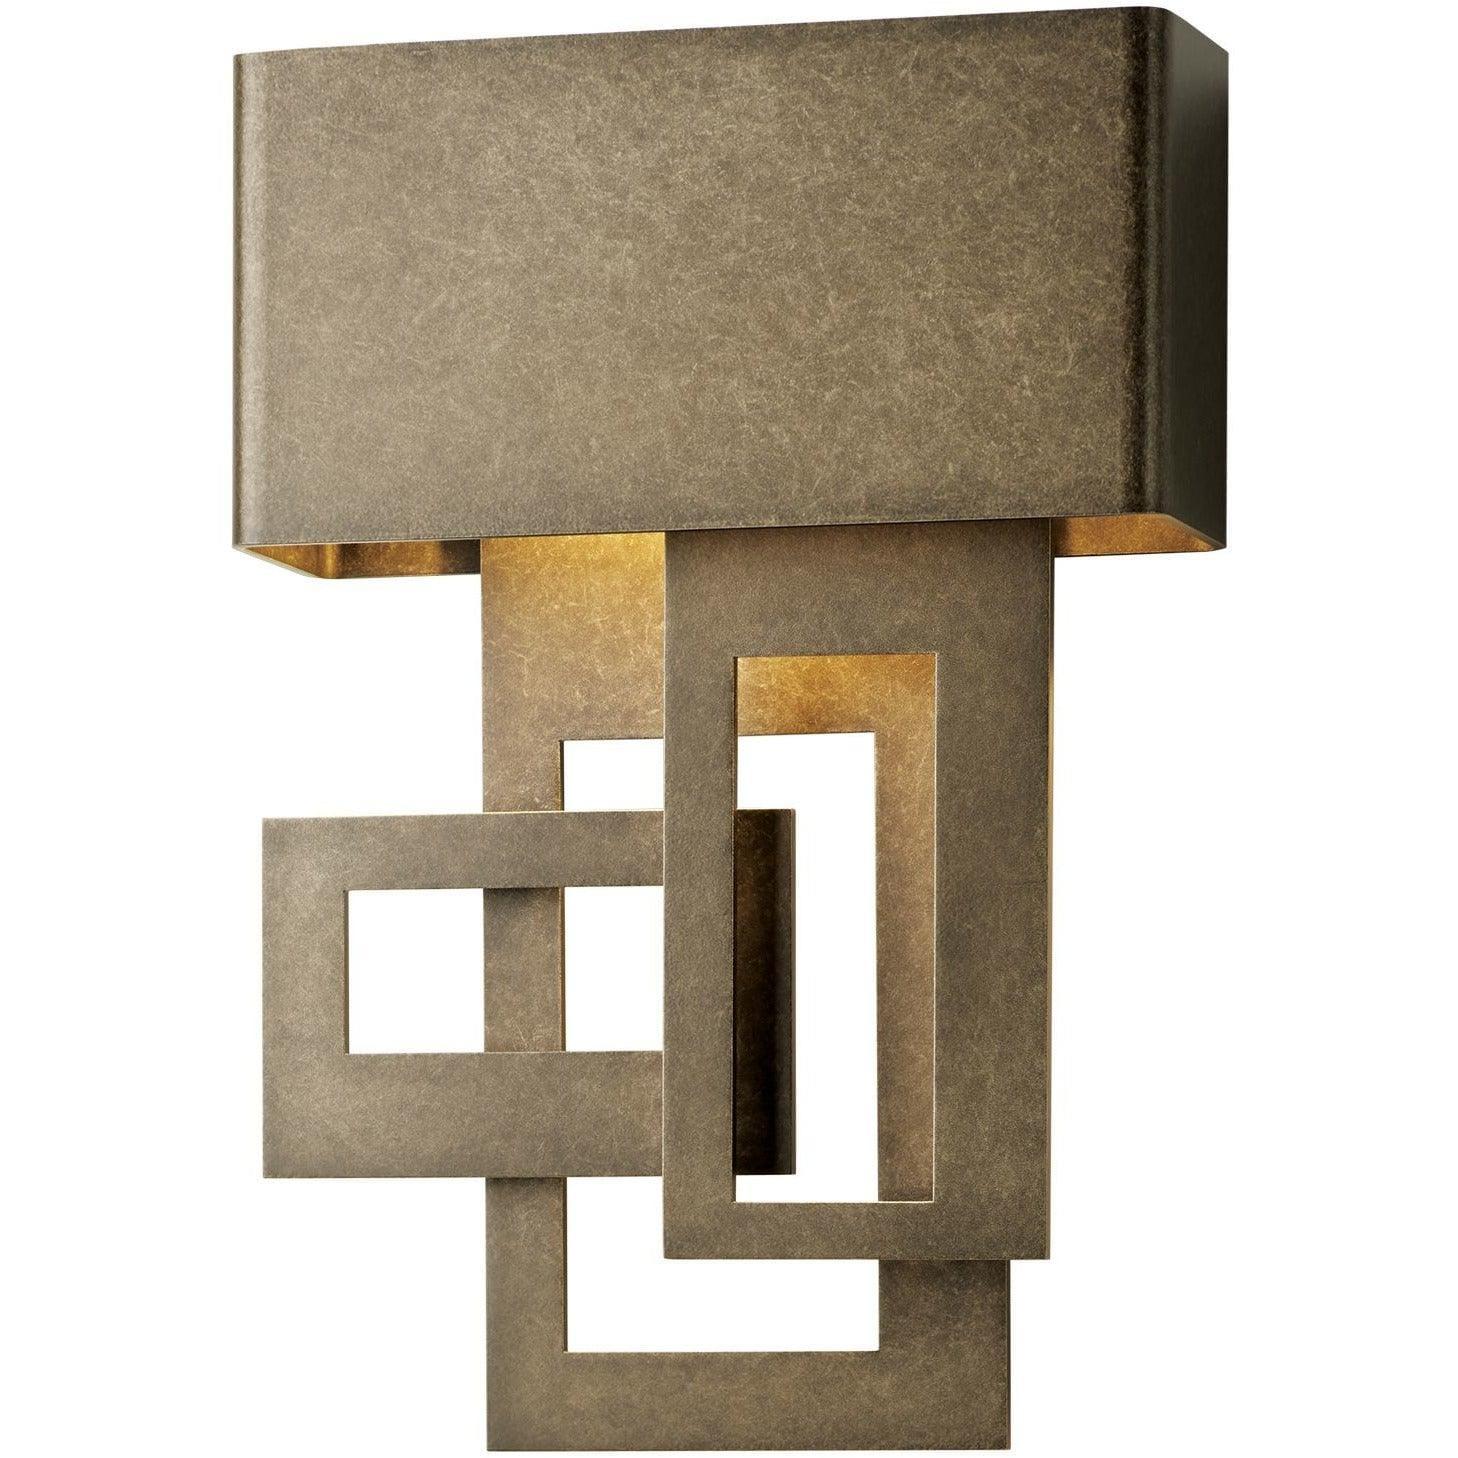 Hubbardton Forge - Collage 13-Inch LED Outdoor Wall Sconce - 302520-LED-RGT-77 | Montreal Lighting & Hardware